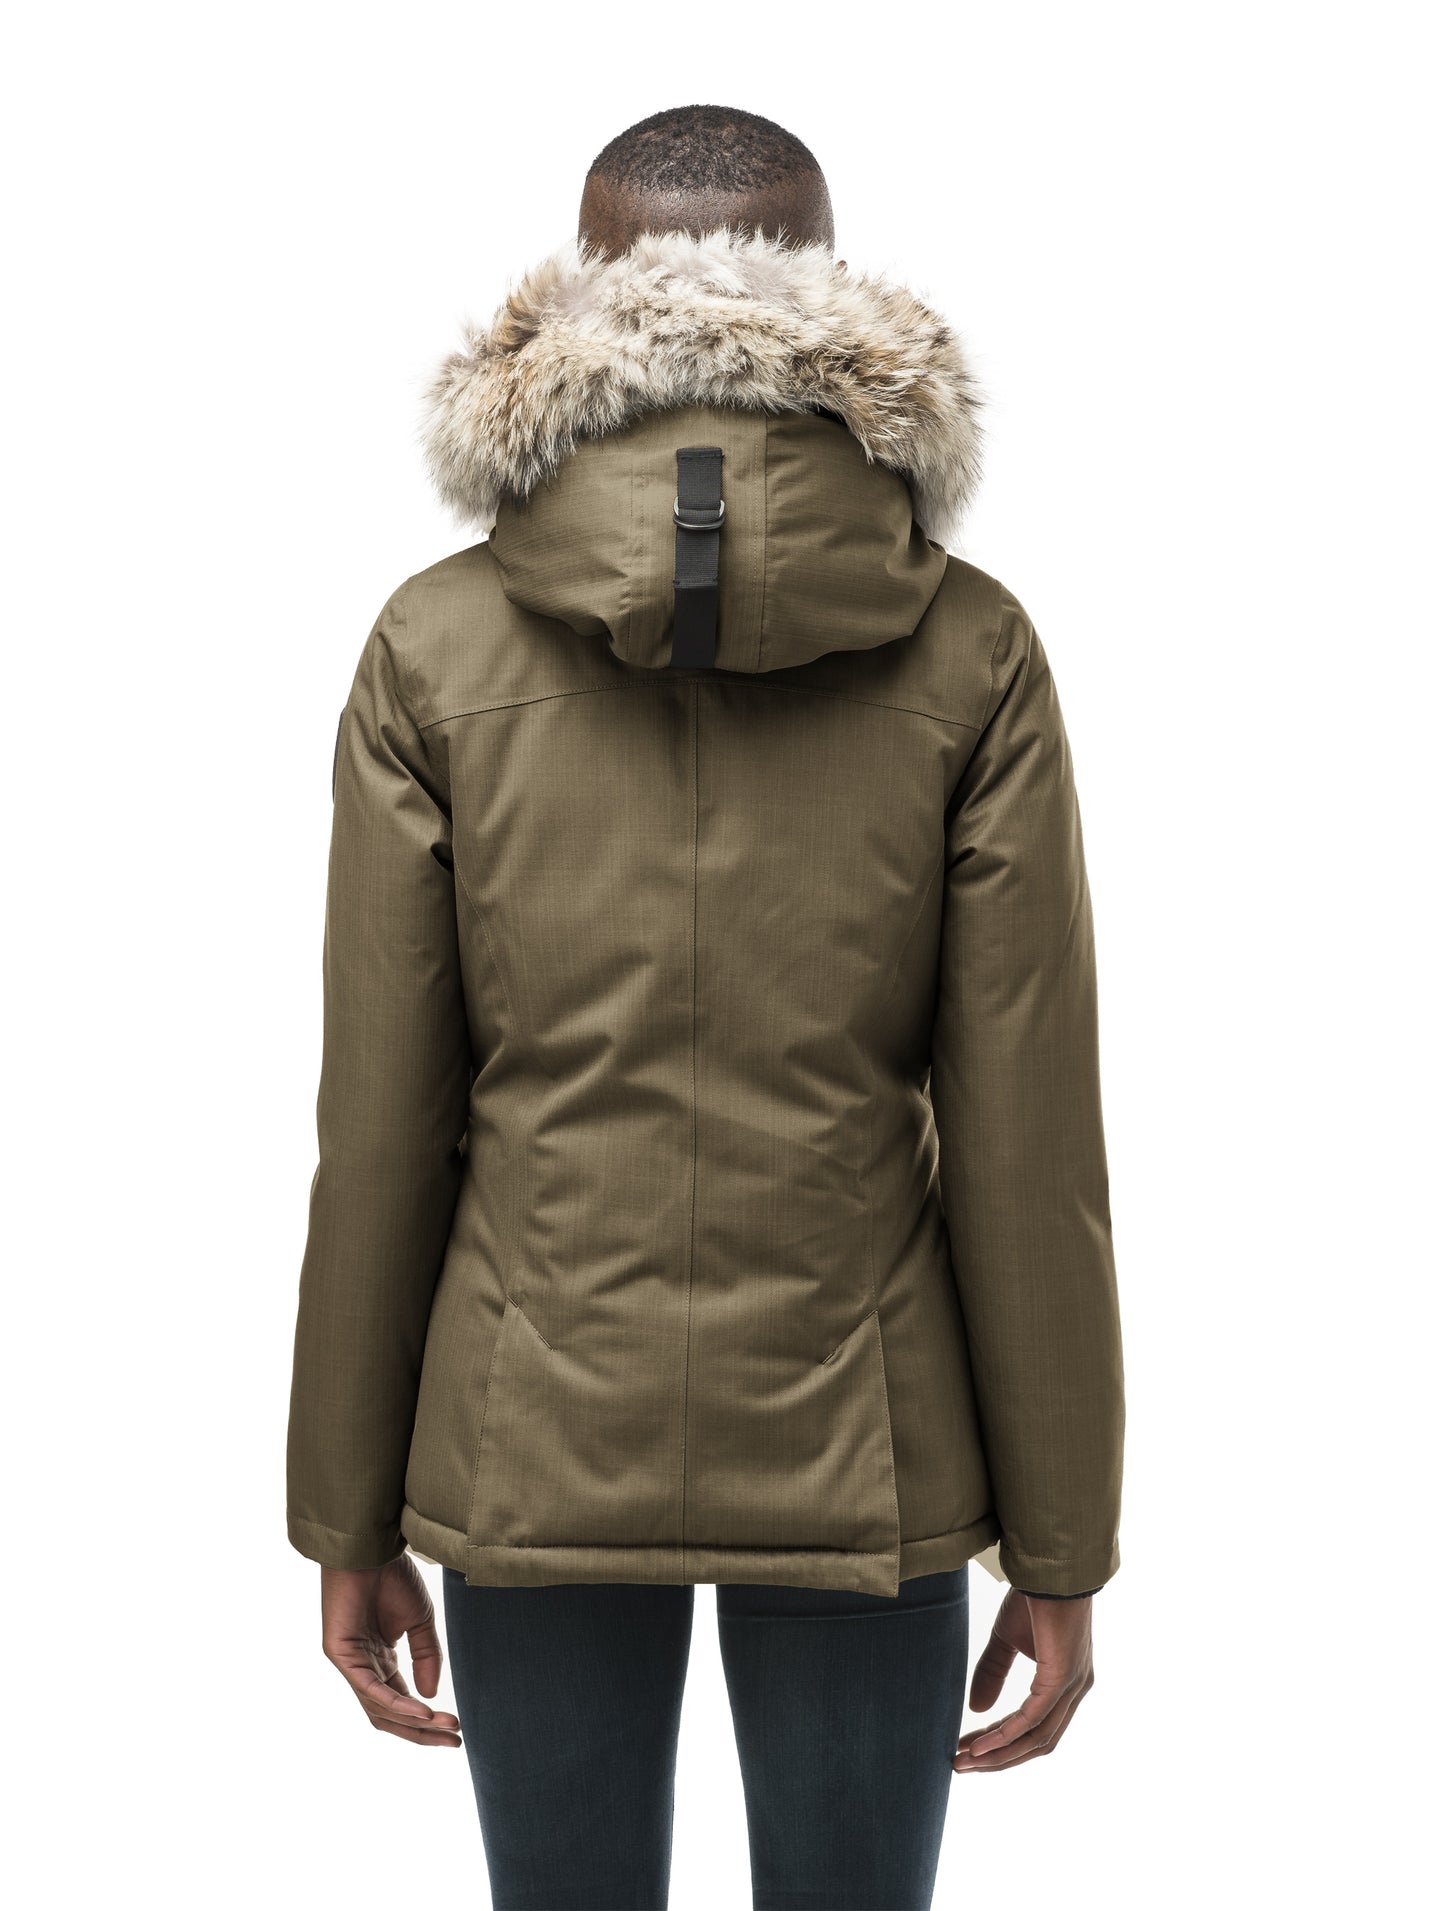 Women's hip length down filled parka in CH Fatigue